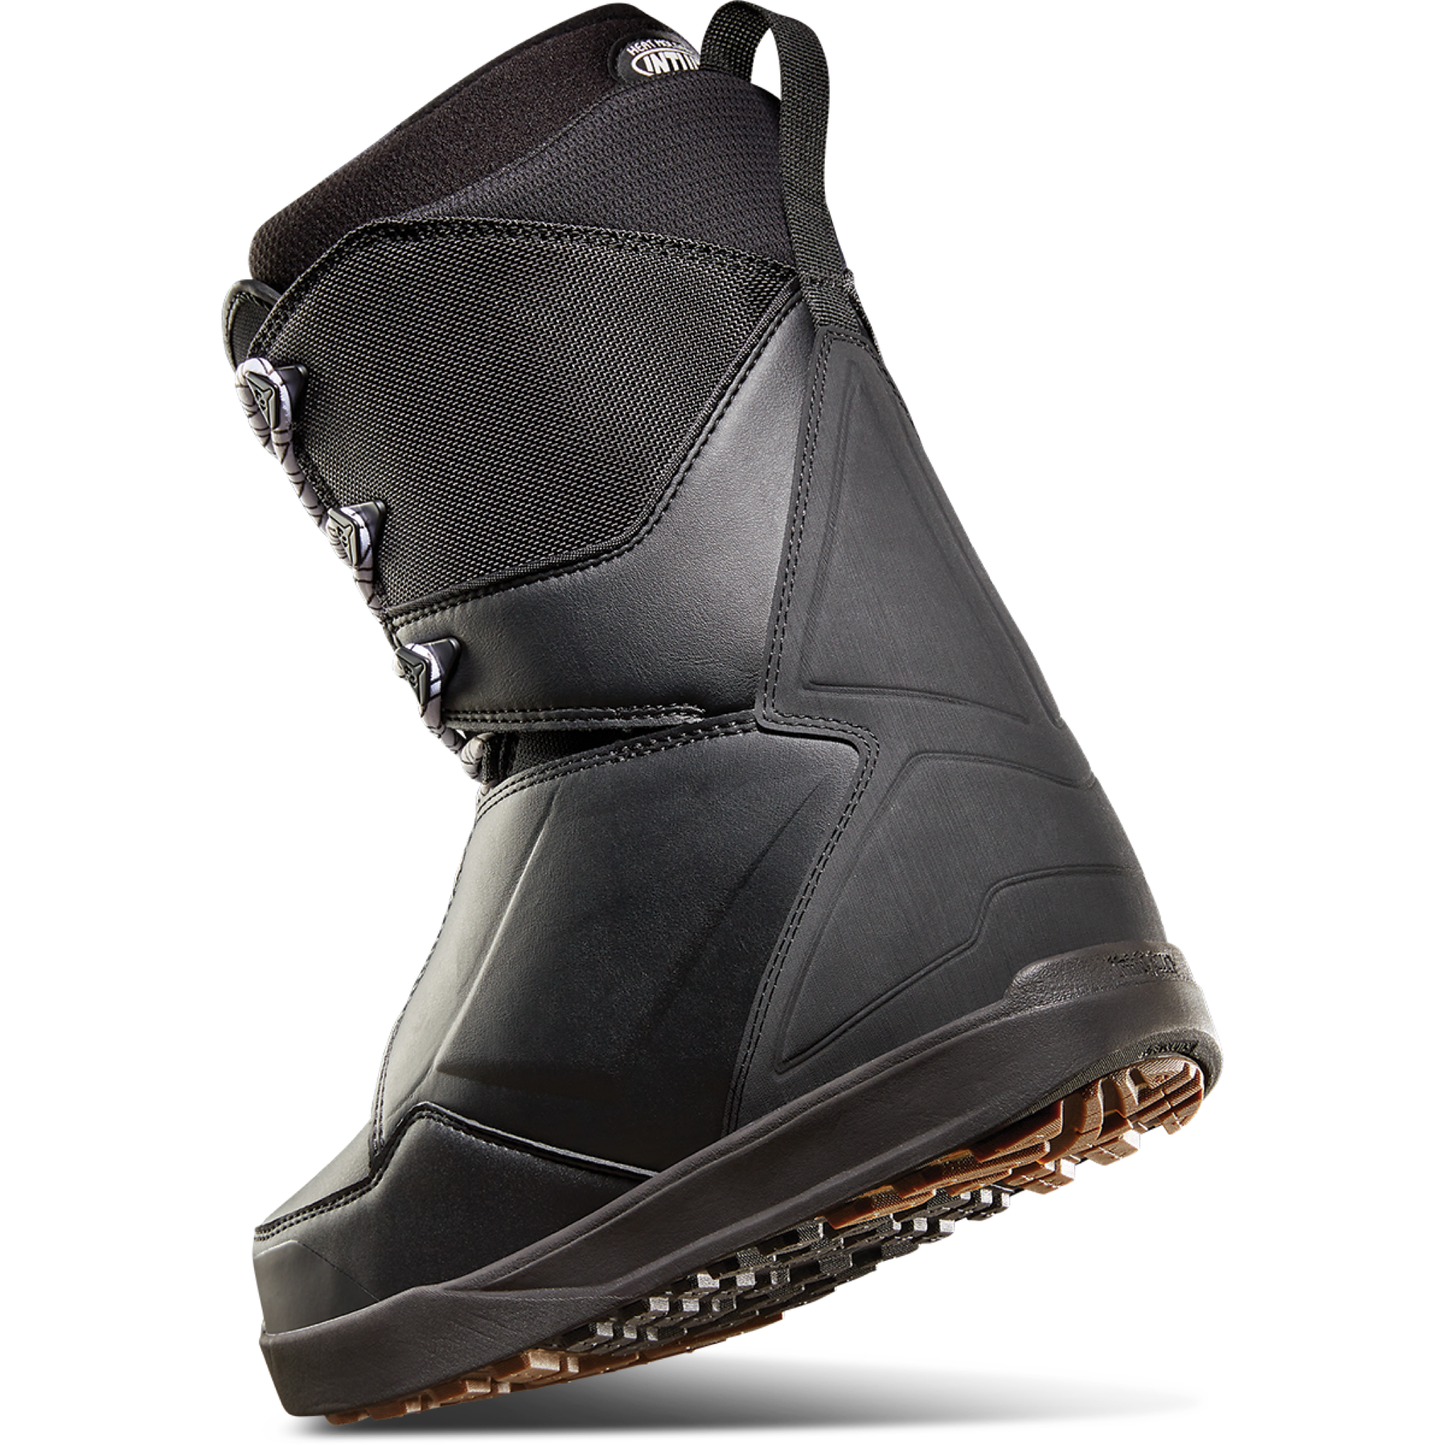 THIRTYTWO LASHED BOOT WIDE